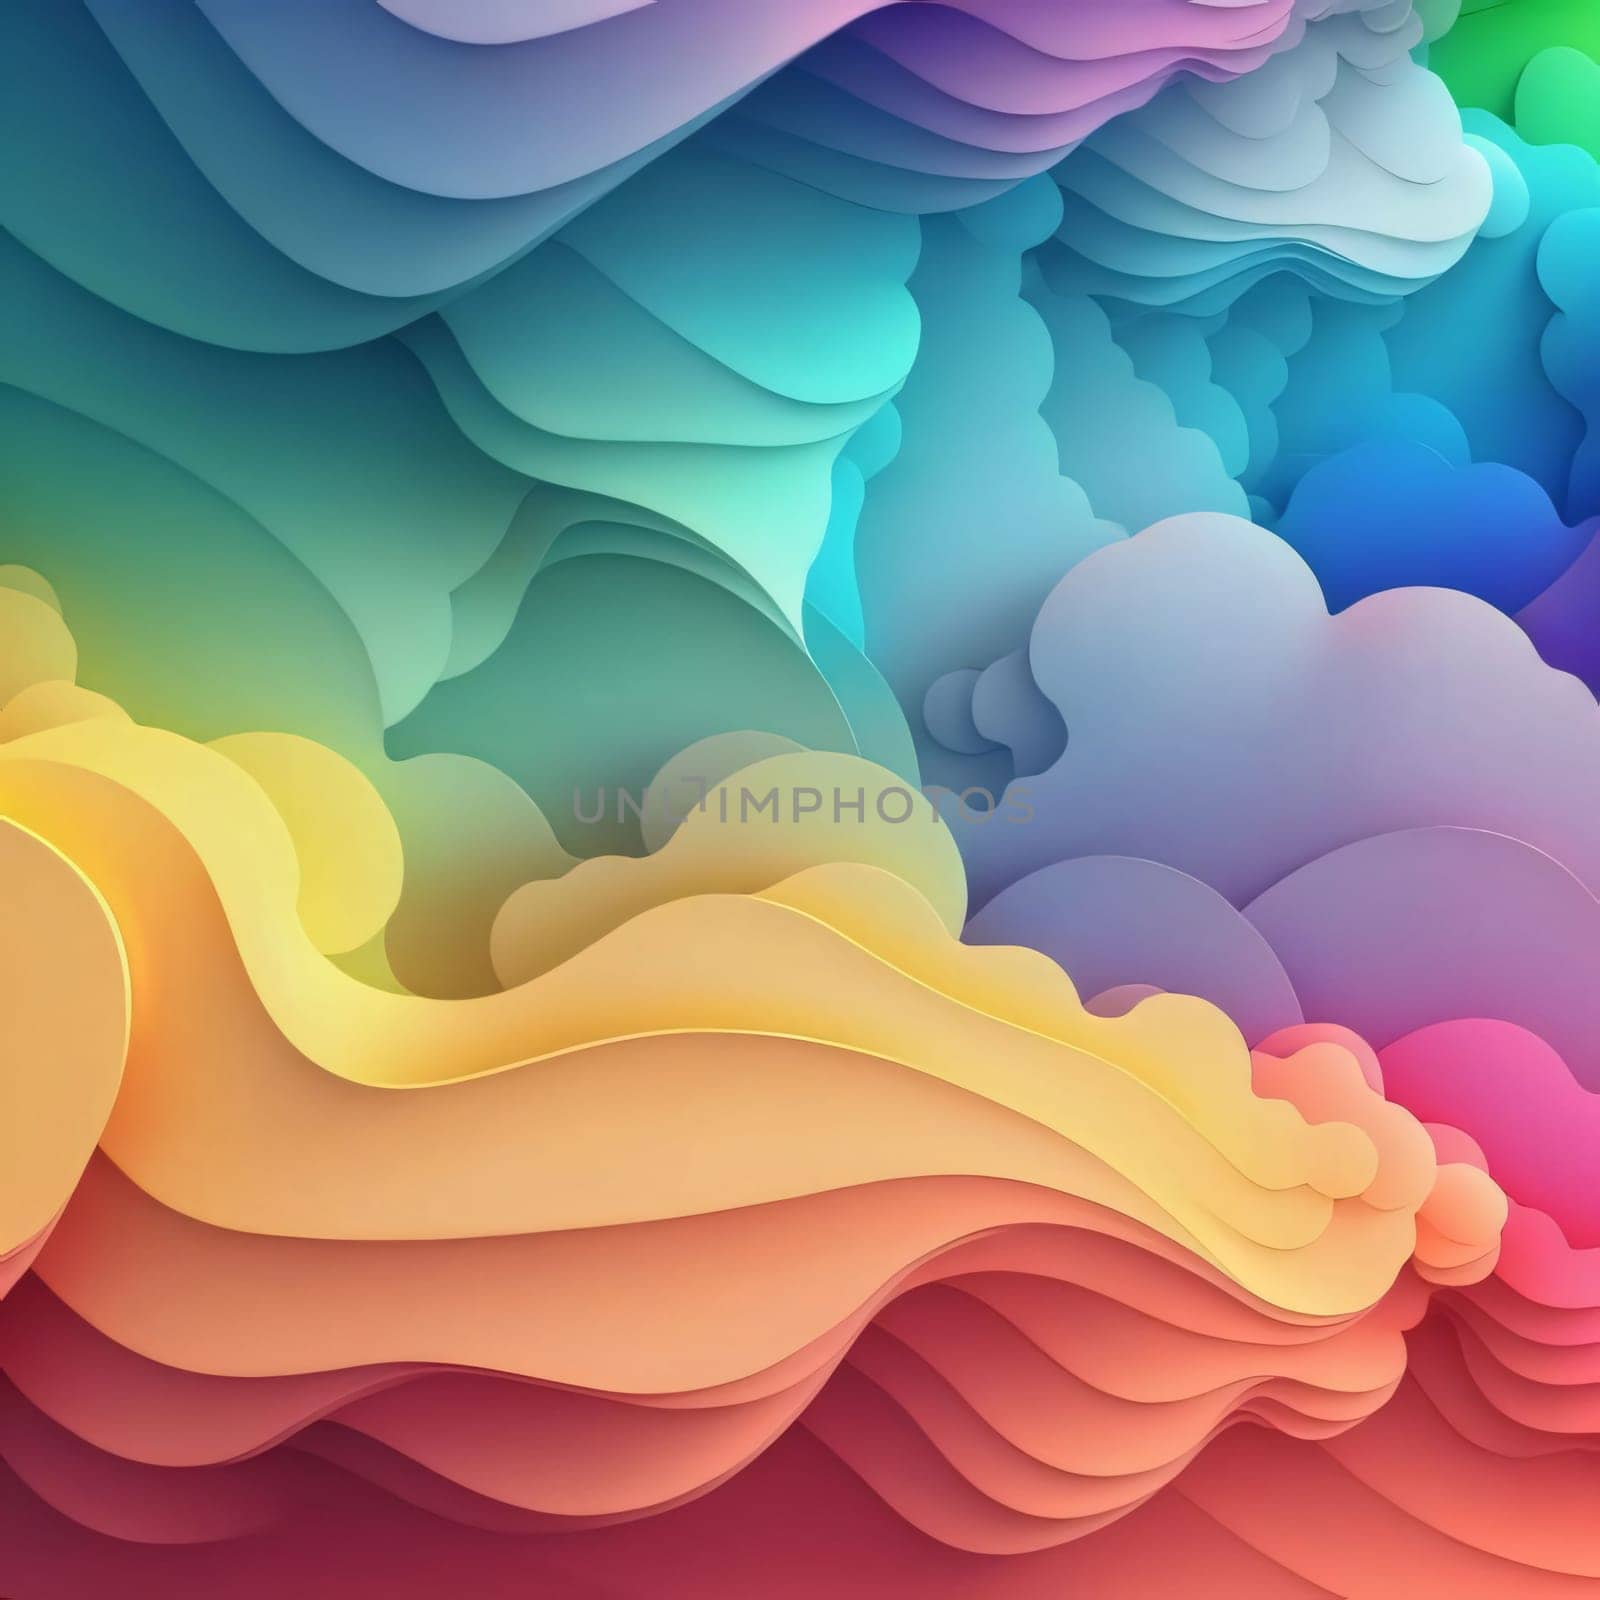 Abstract background design: Rainbow abstract background. 3d paper cut style. Vector illustration.